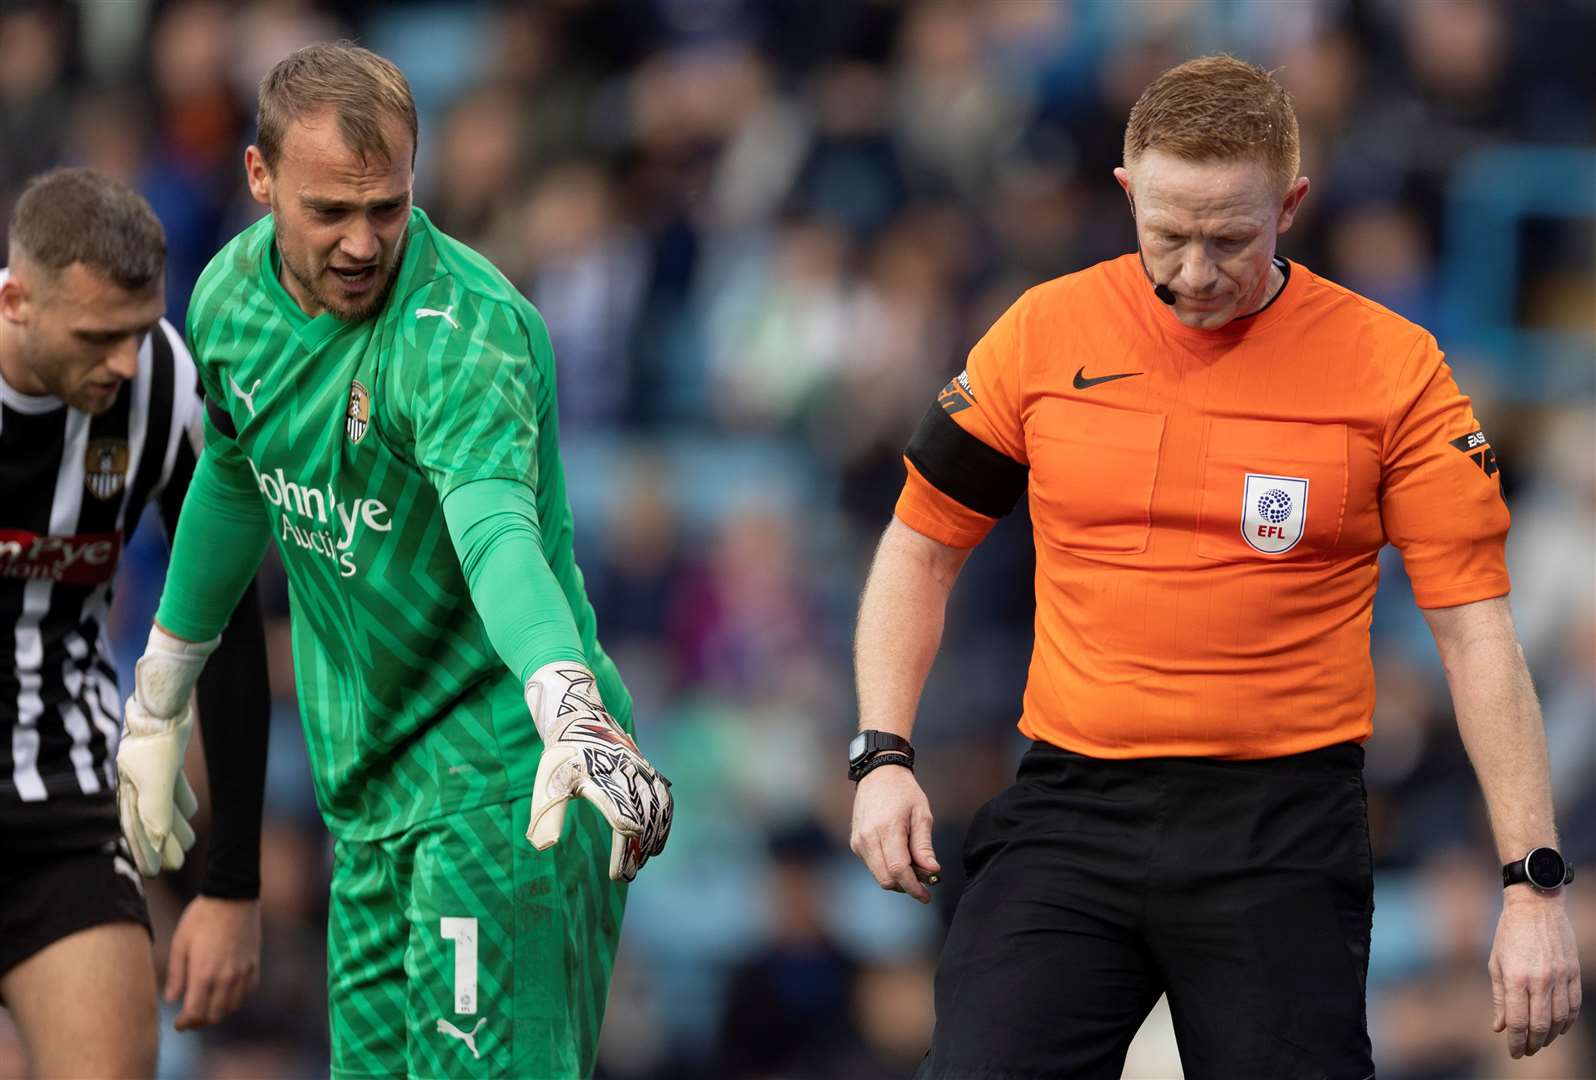 Goalkeeper Sam Slocombe received a cut to the head at Priestfield on Saturday and points to an object thrown Picture: @Julian_KPI